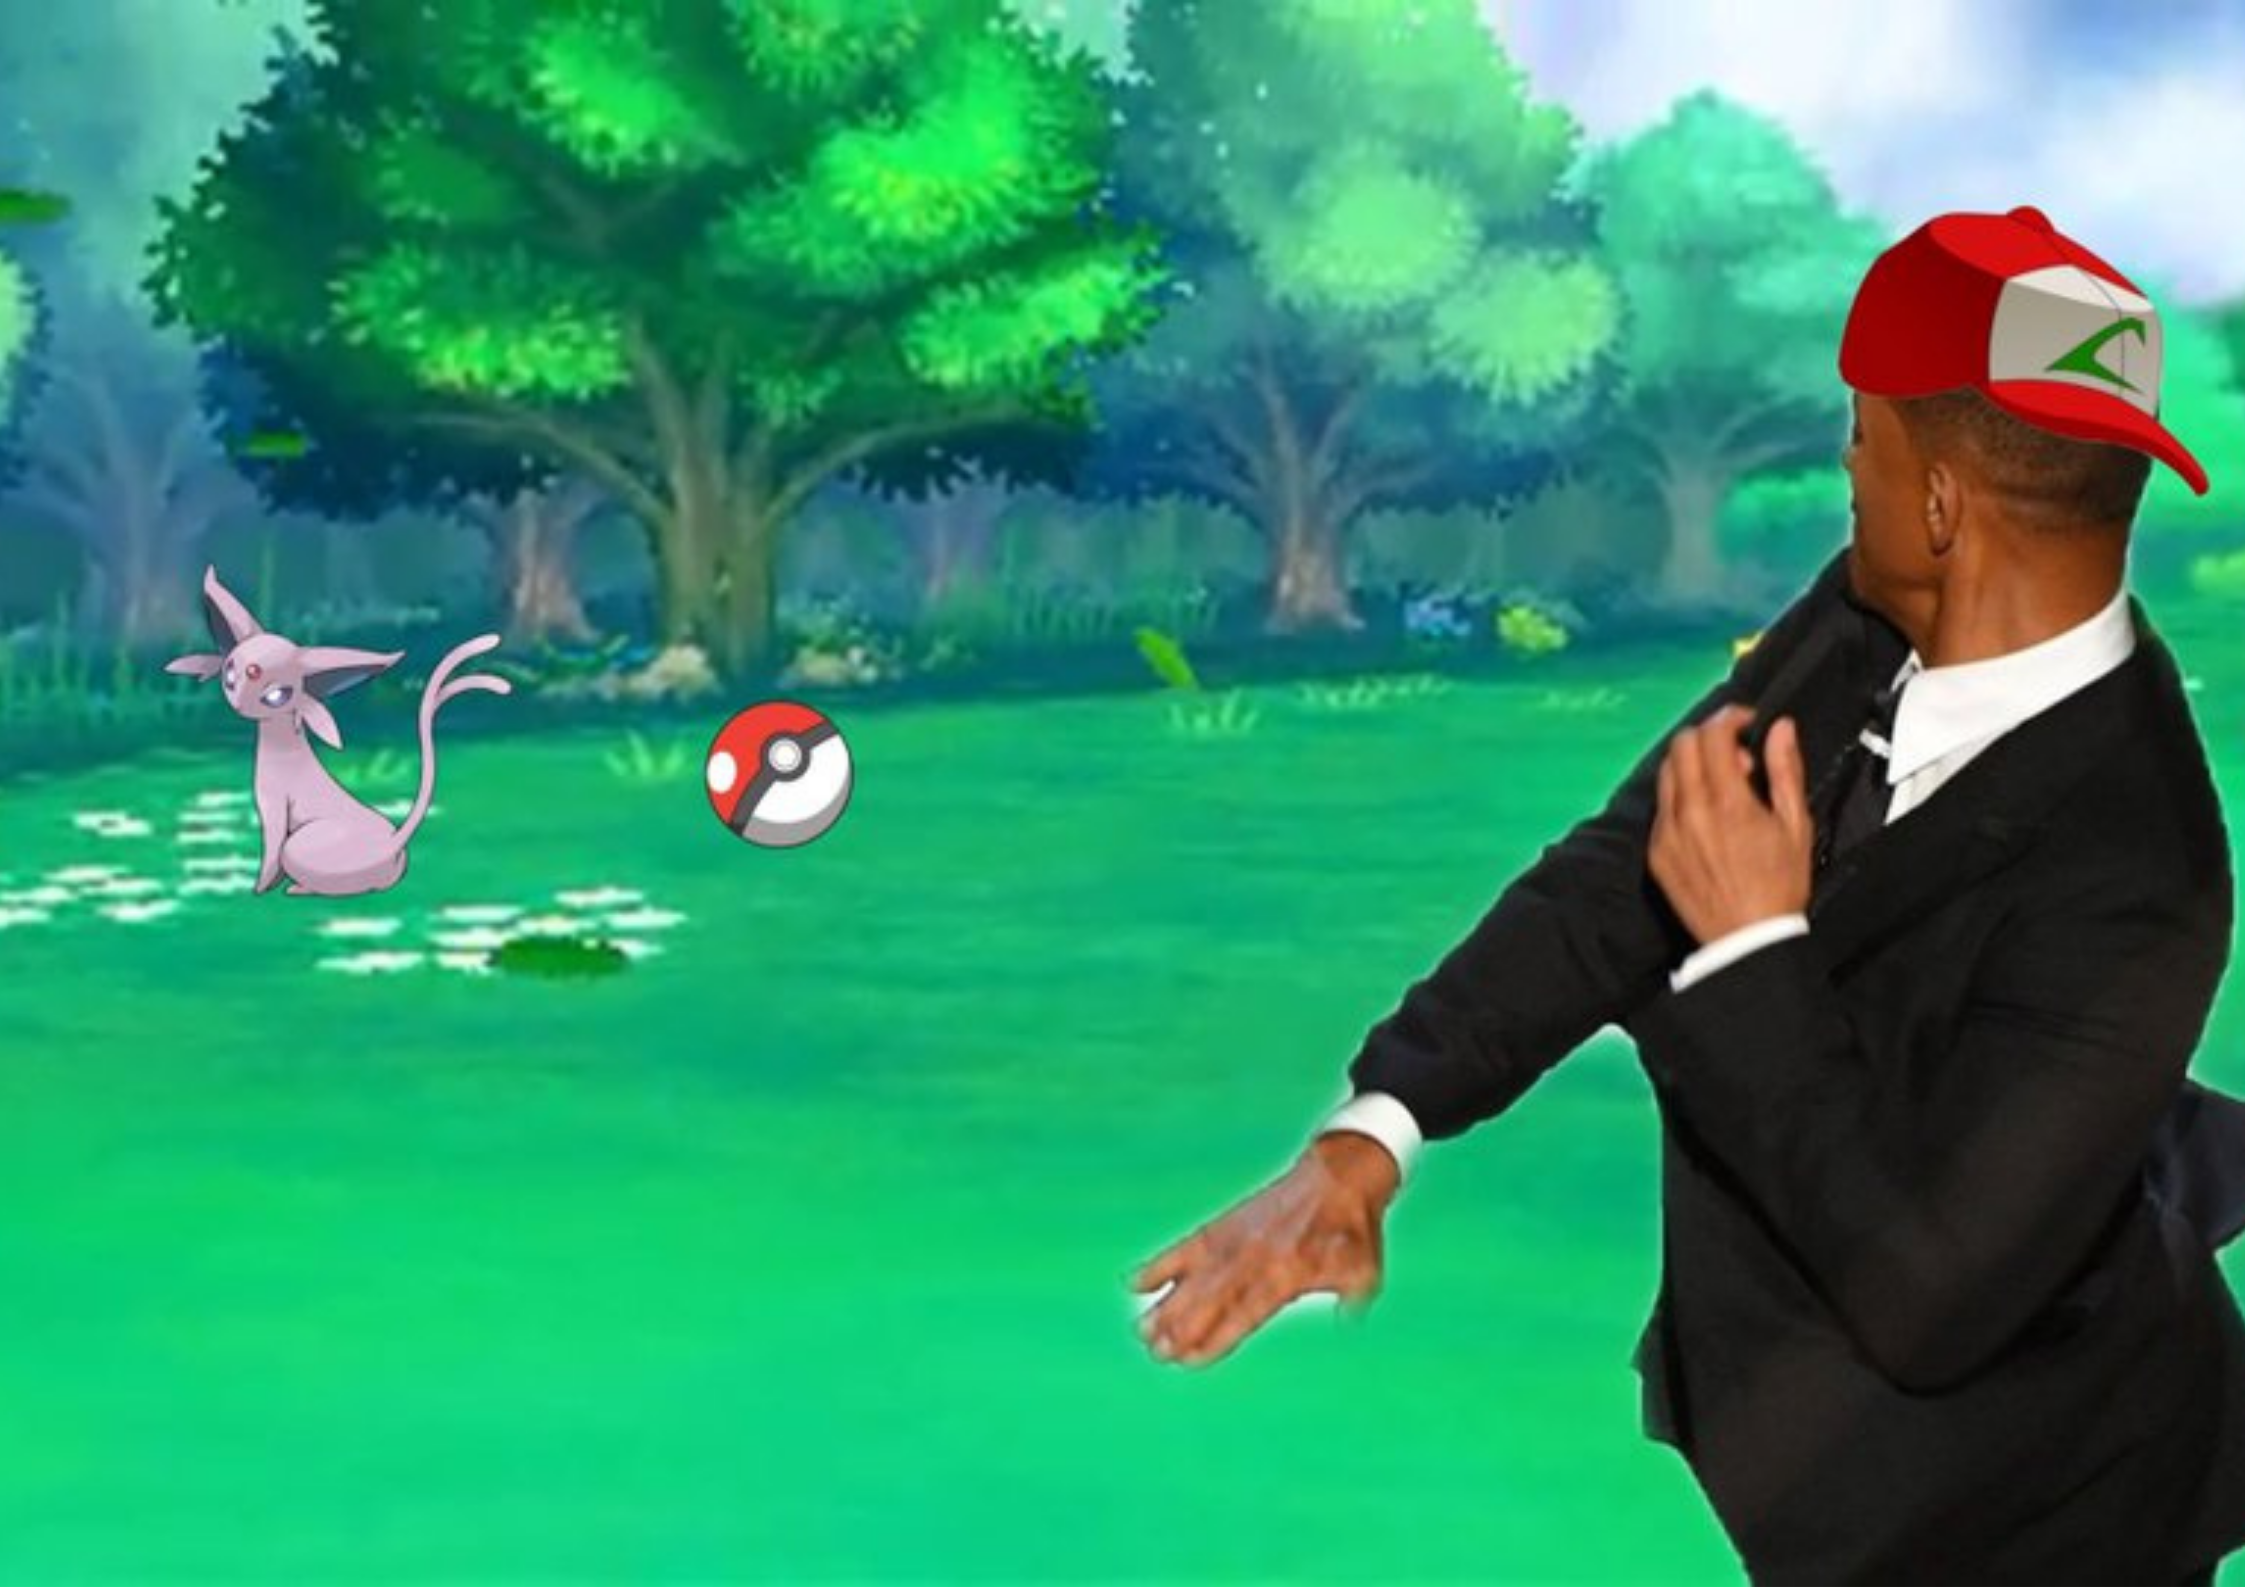 Will smith wearing cap throwing a pokemon ball on the woods